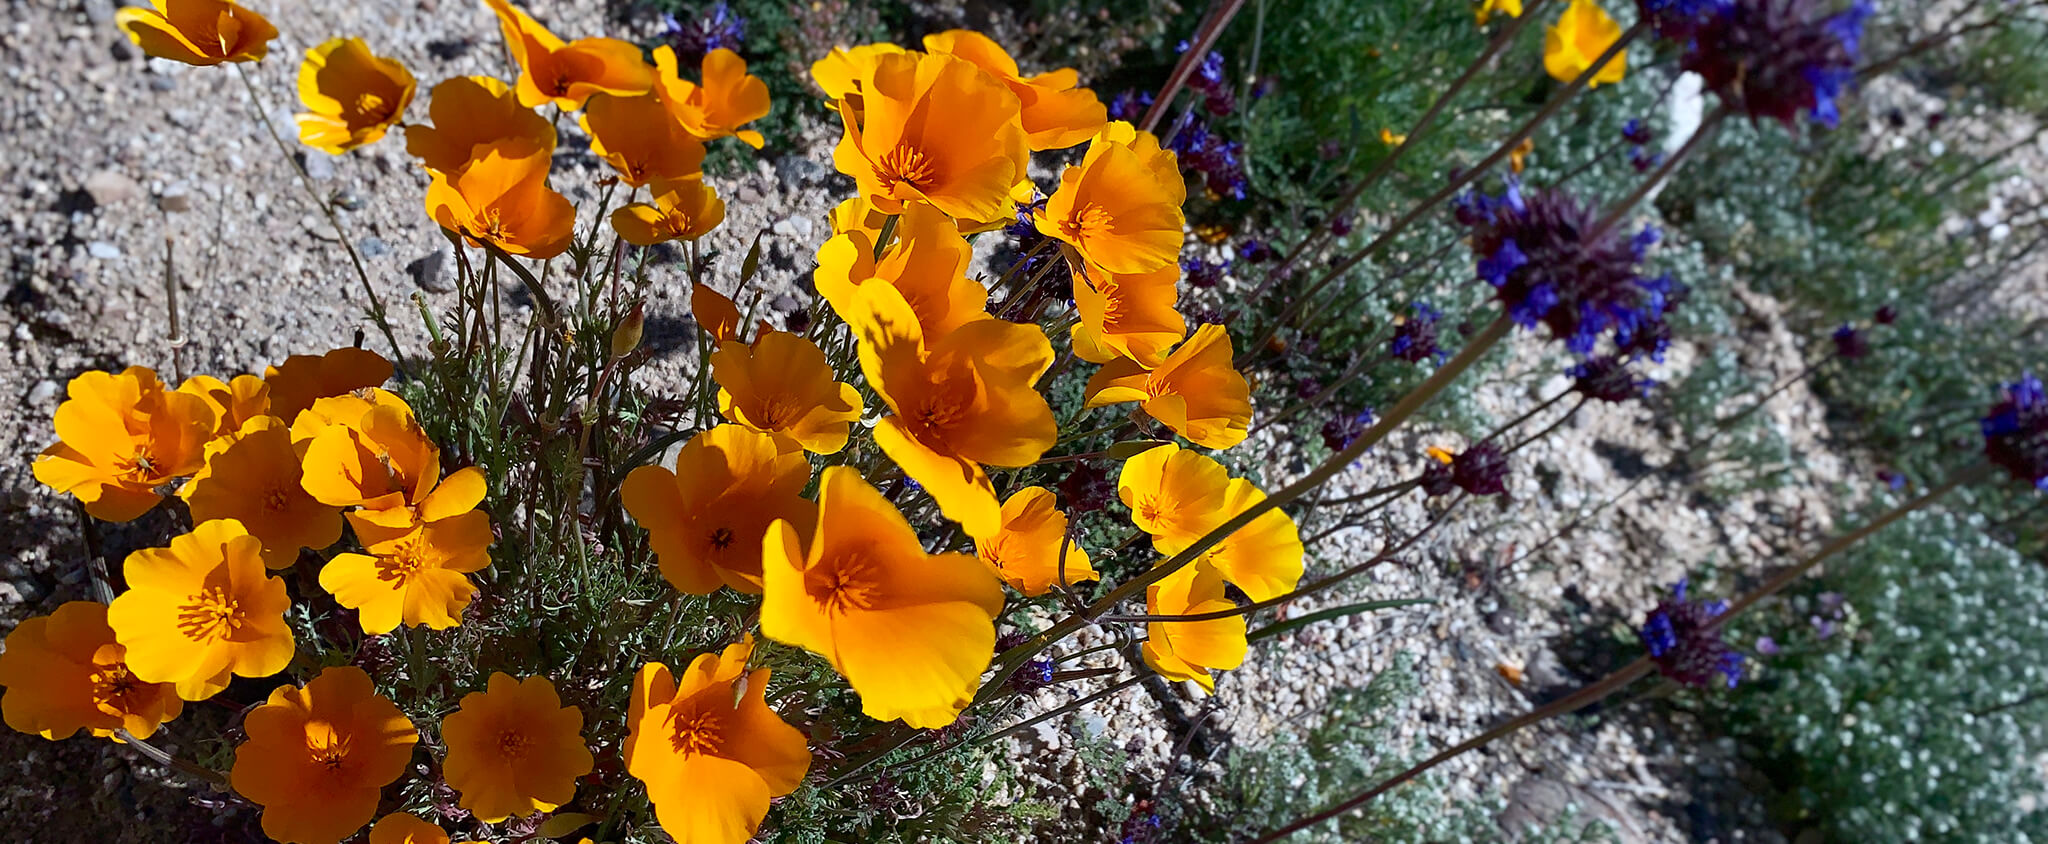 A field of orange and purple flowers in the desert.